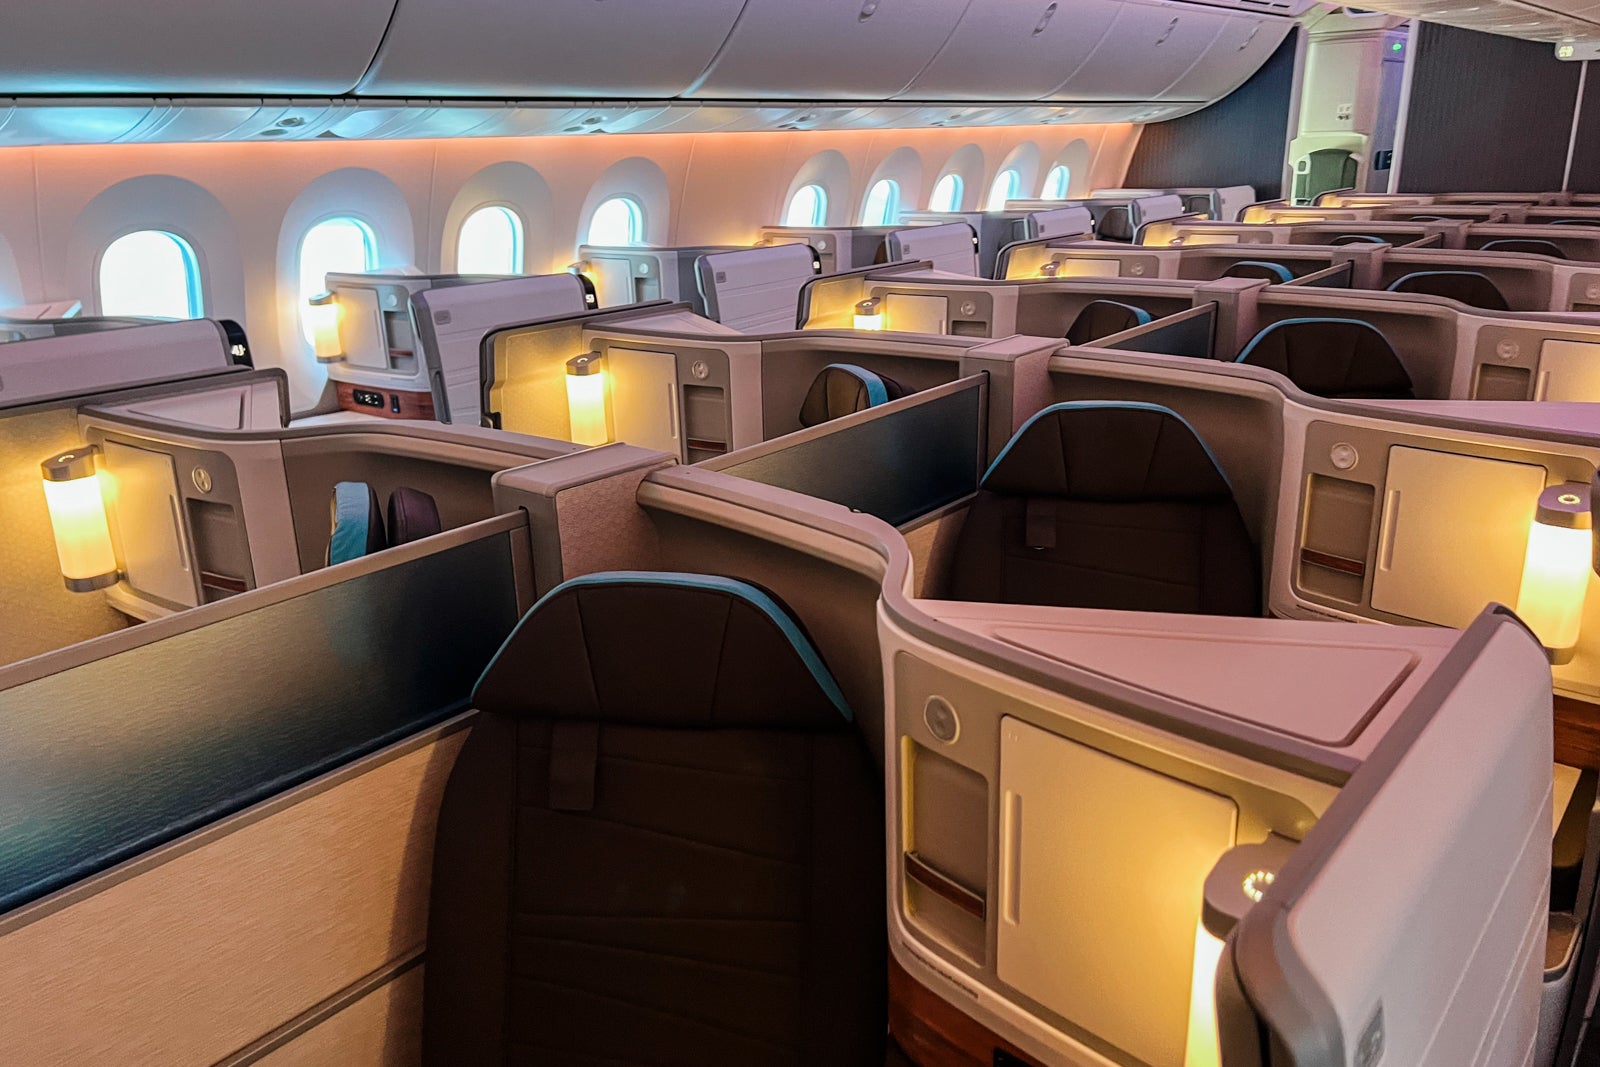 Read more about the article Where is the best seat on an airplane? Here’s how to choose the place to sit whenever you fly